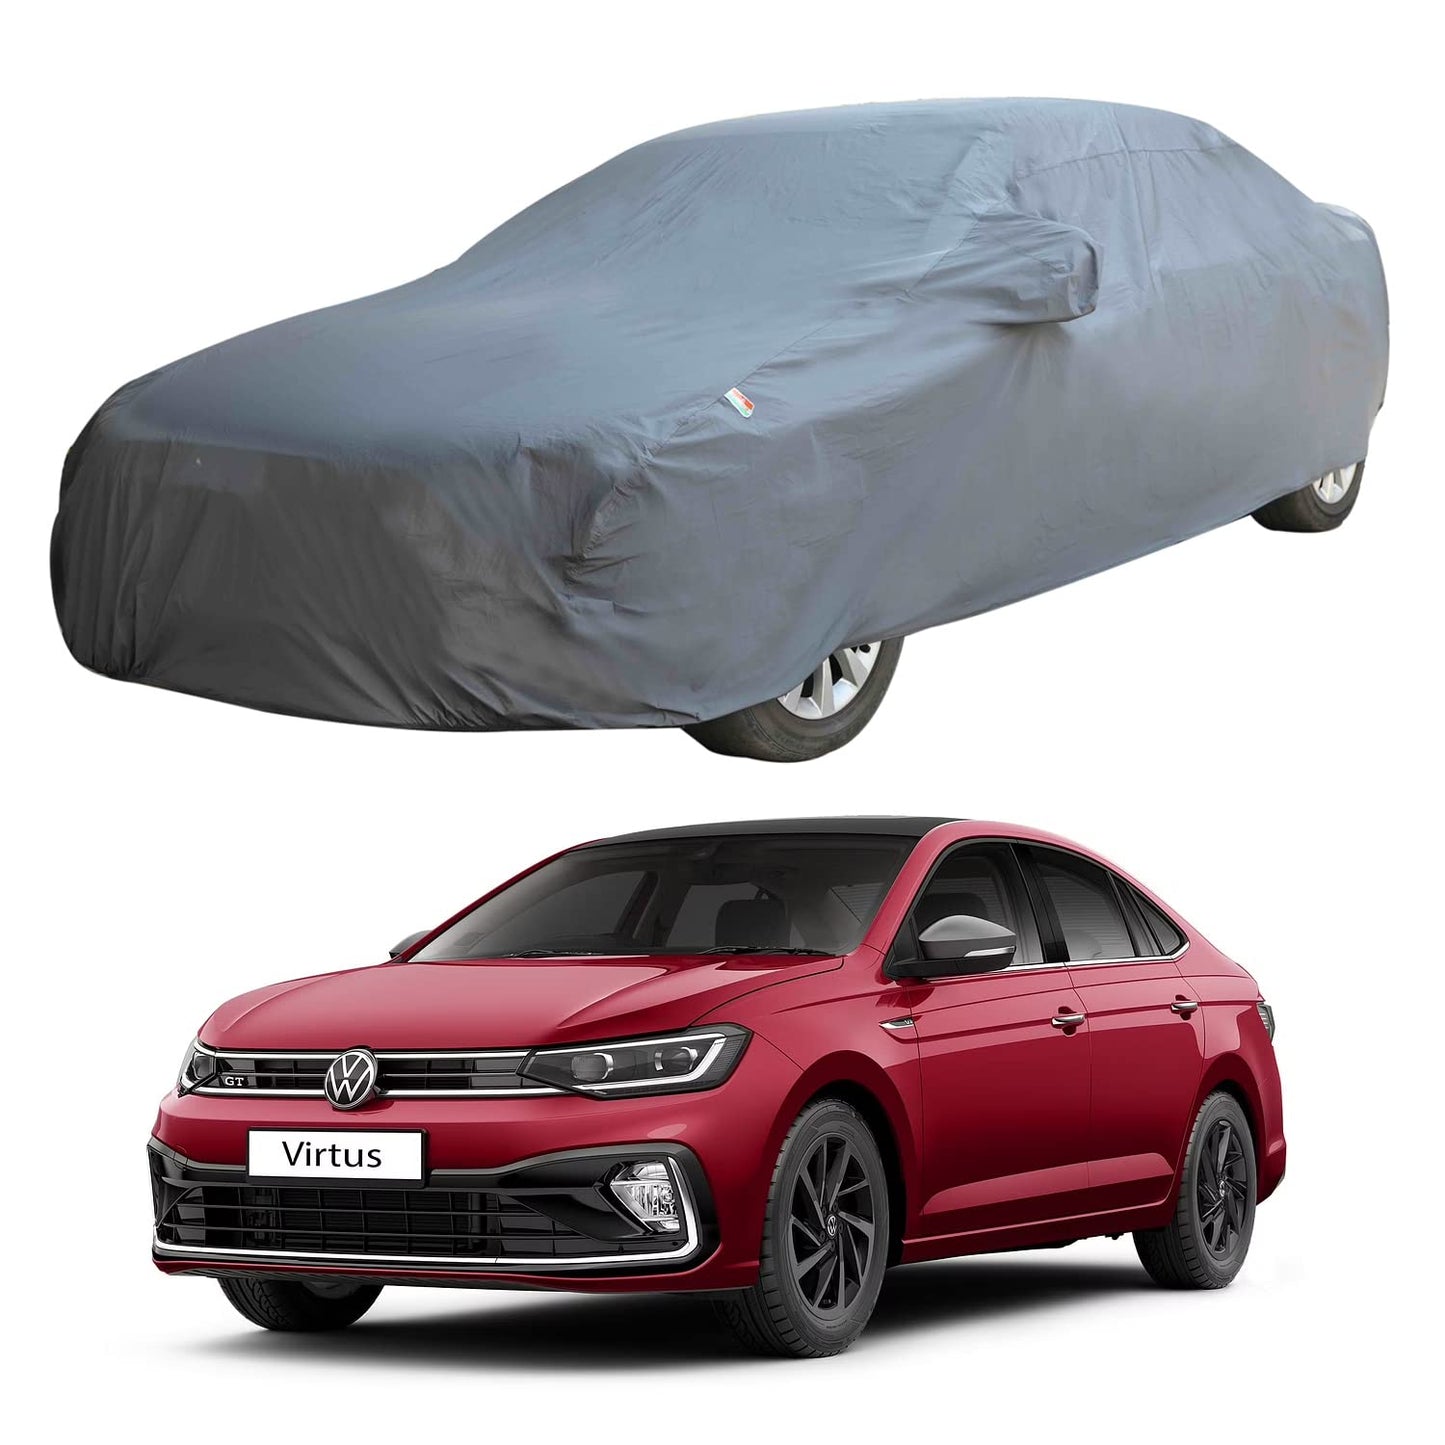 Oshotto Dark Grey 100% Anti Reflective, dustproof and Water Proof Car Body Cover with Mirror Pockets For Volkswagen Virtus